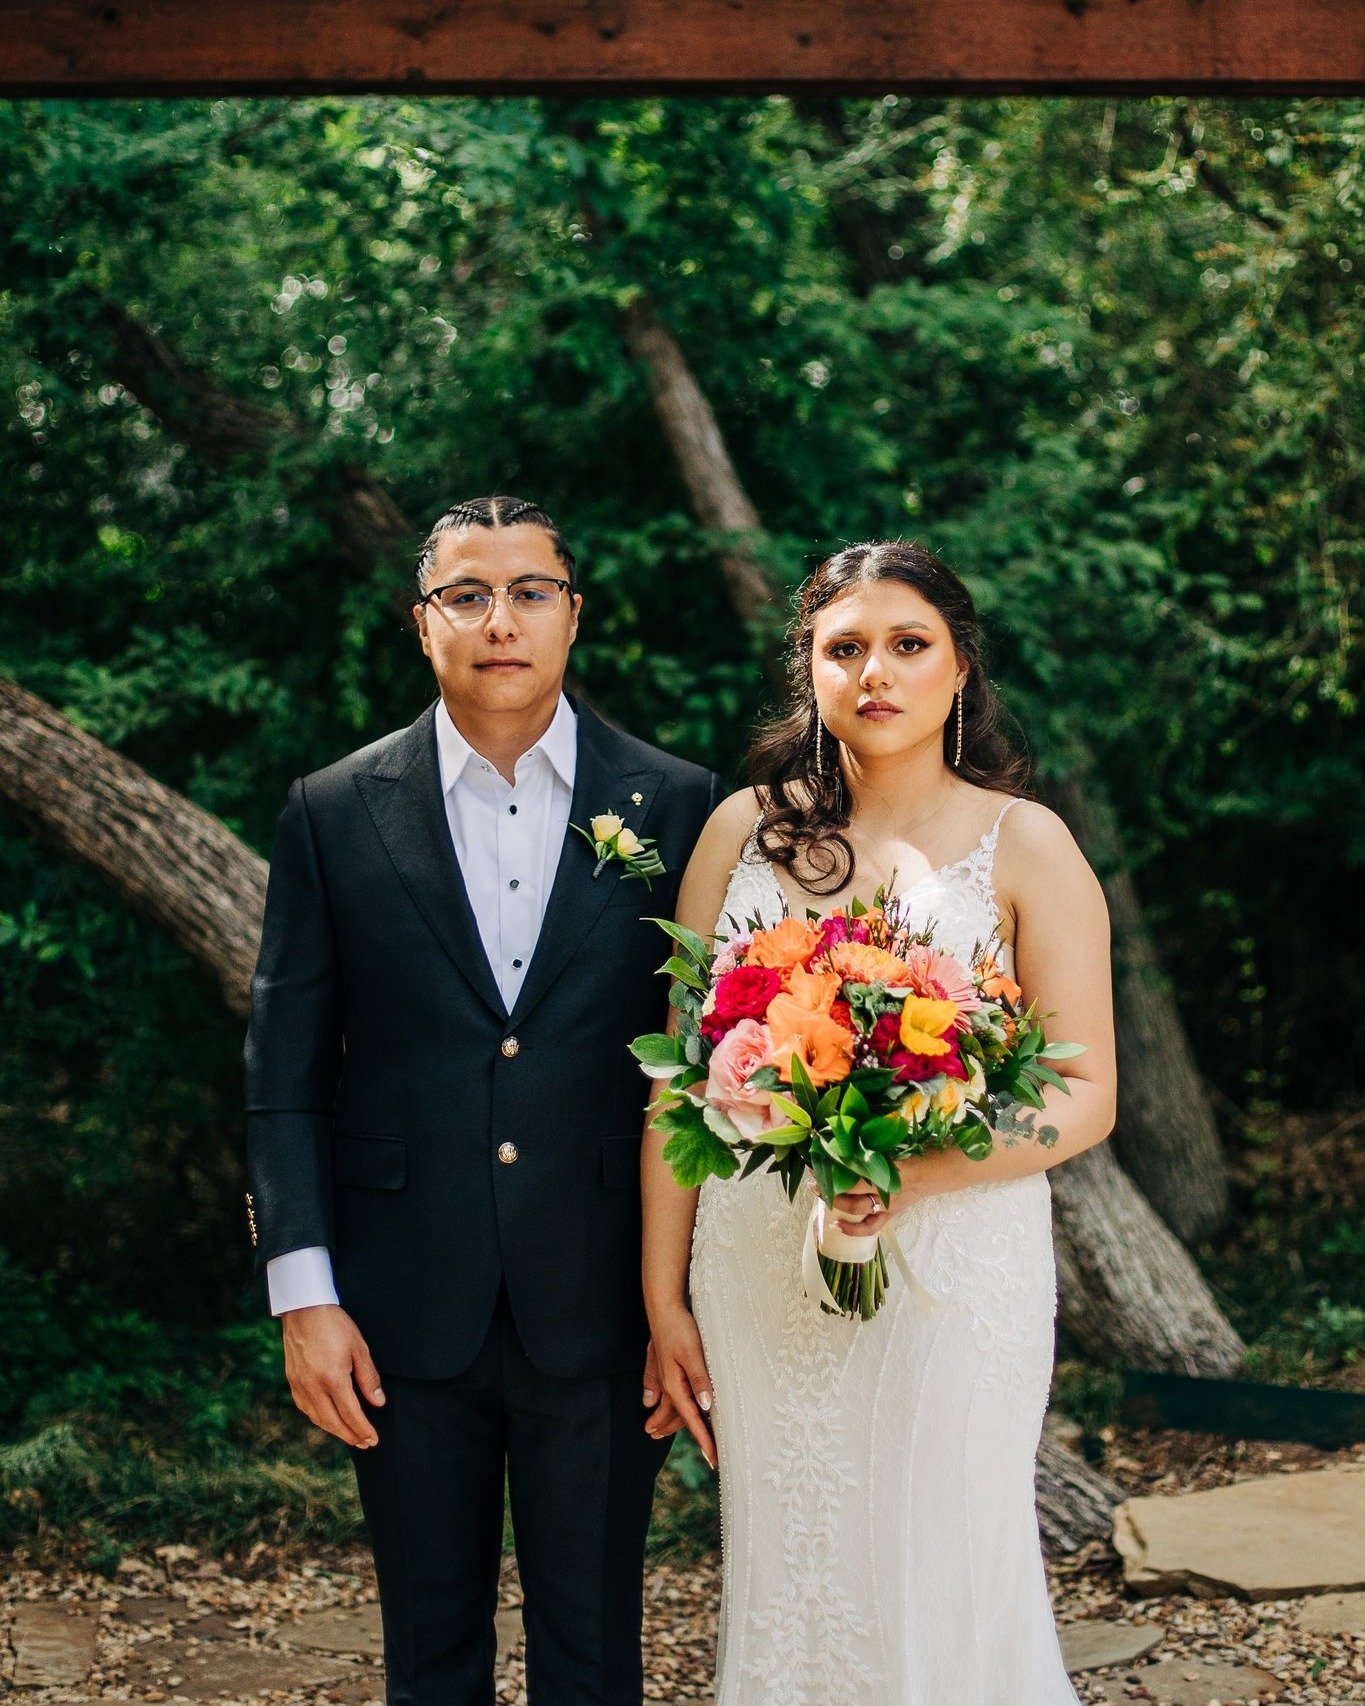 This day last year, I was in Texas with these two incredible souls. What I wouldn't give to go back to their amazing celebration.

Laura + Erick, happiest of first anniversaries!